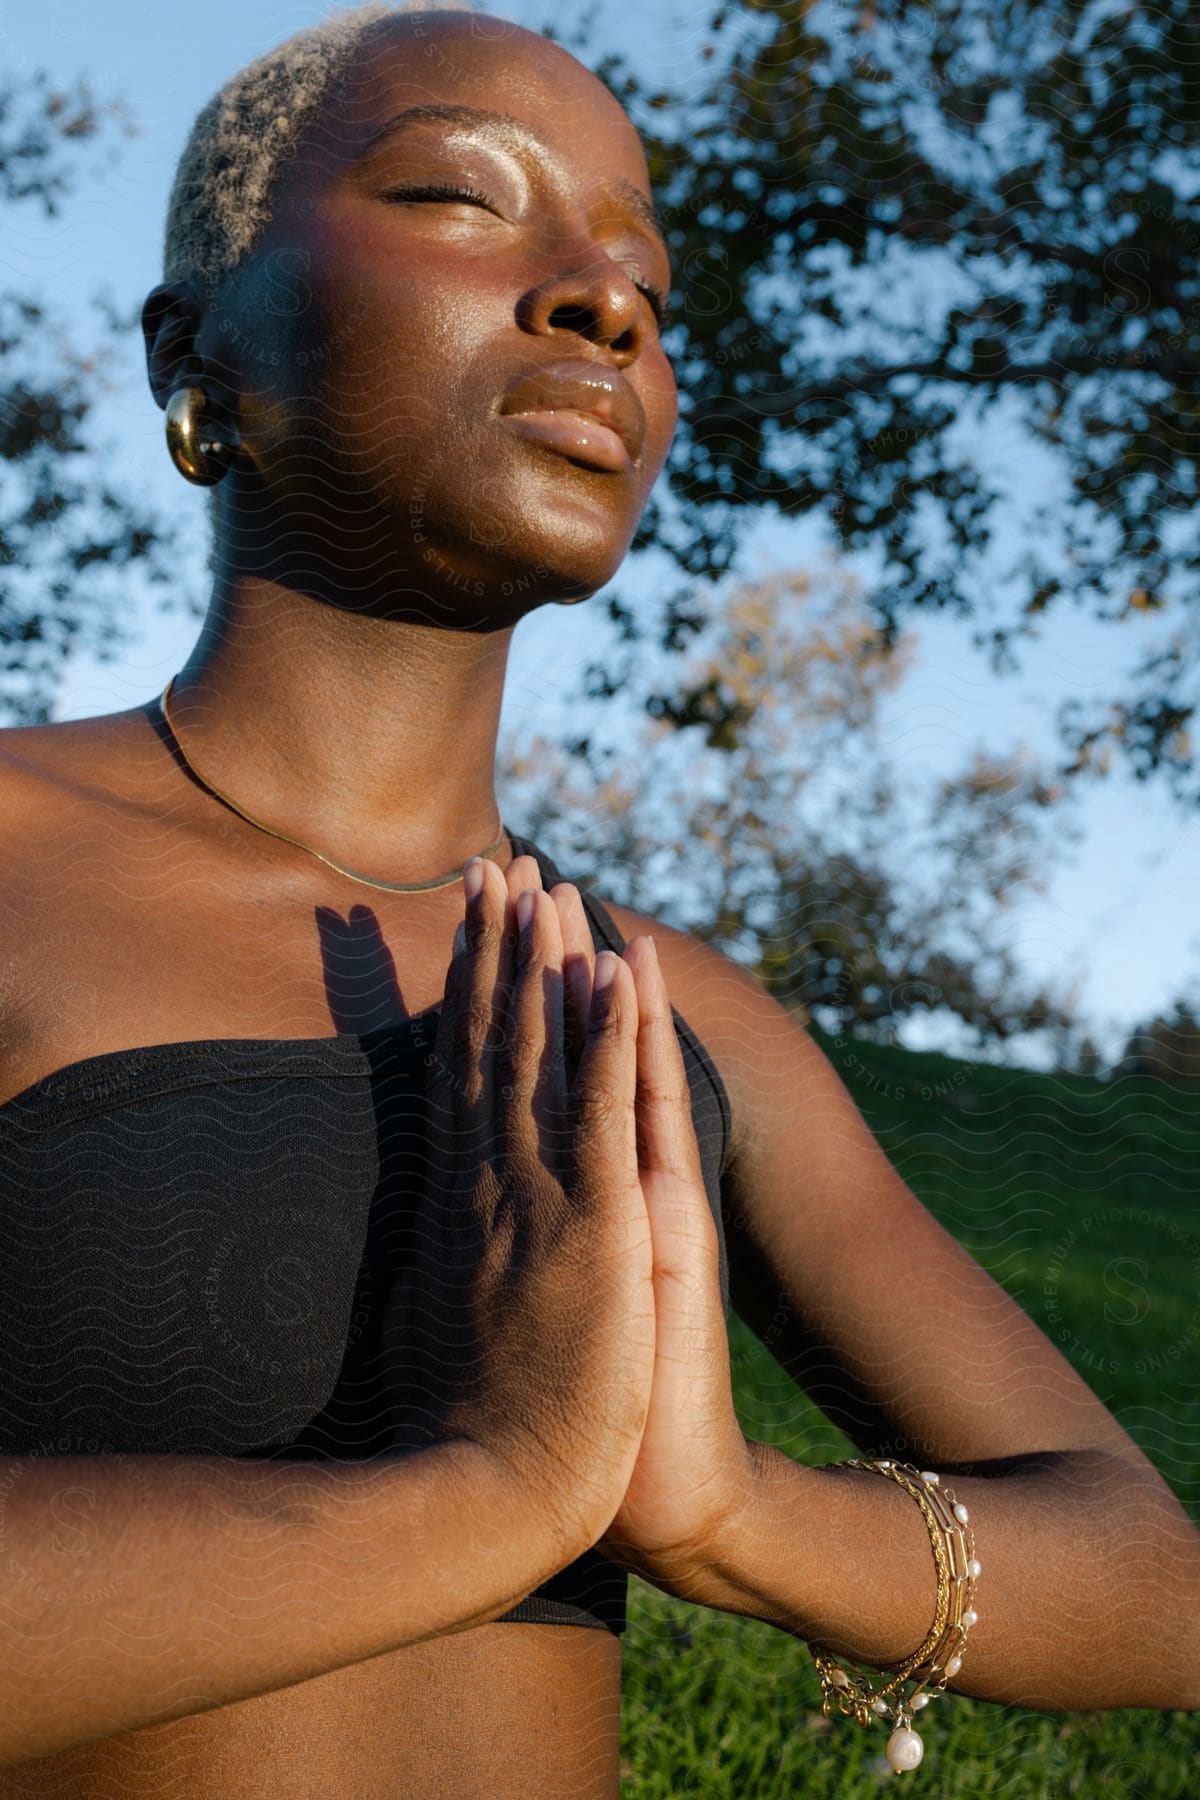 An African woman practices yoga in a park on a sunny day.